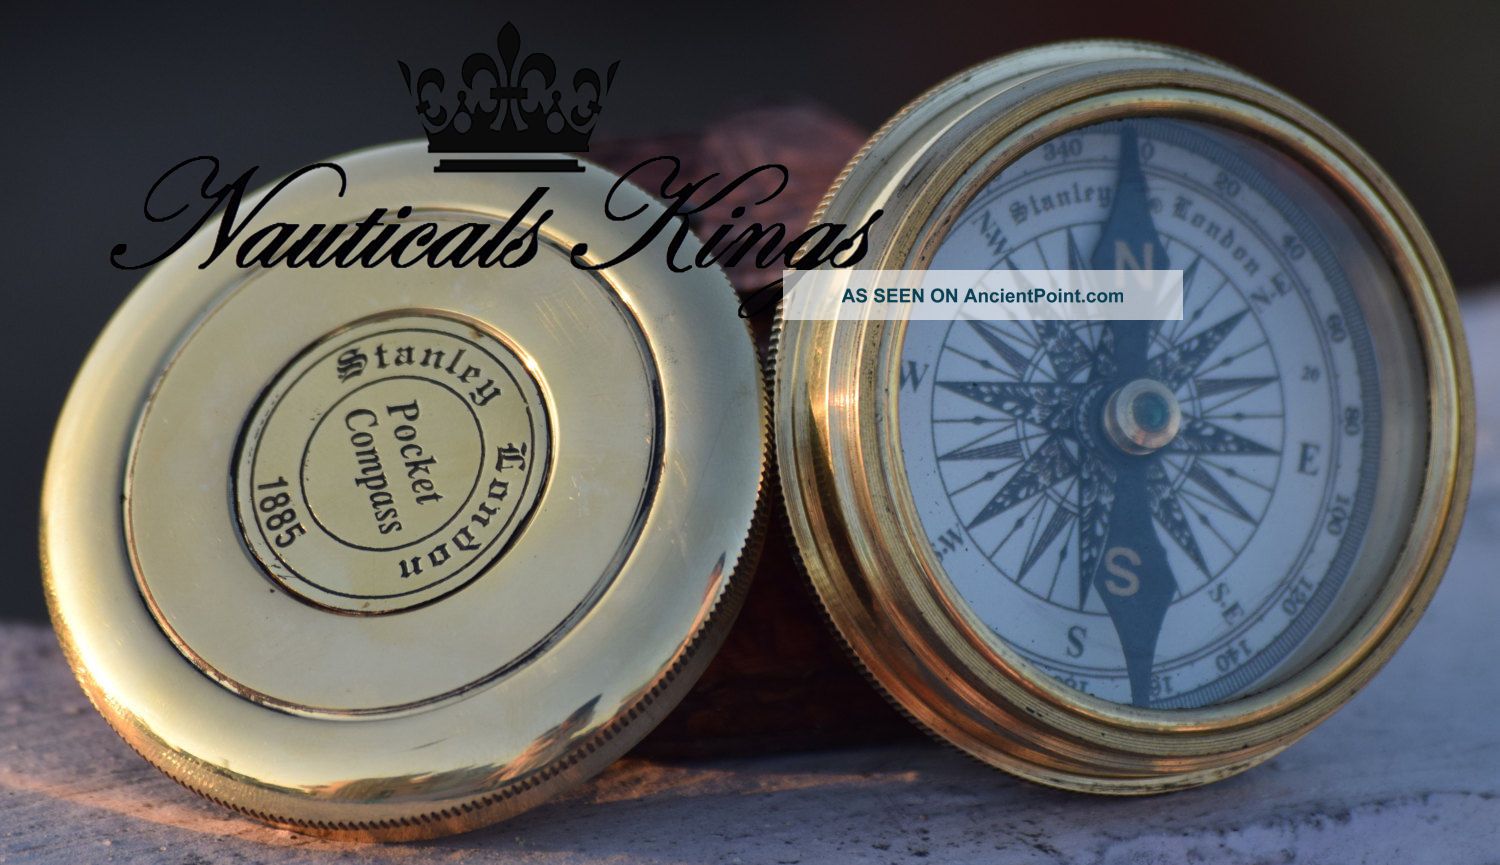 Vintage Robert Frost 1885 Poem Engraved London Compass Marine With Lather Case Compasses photo